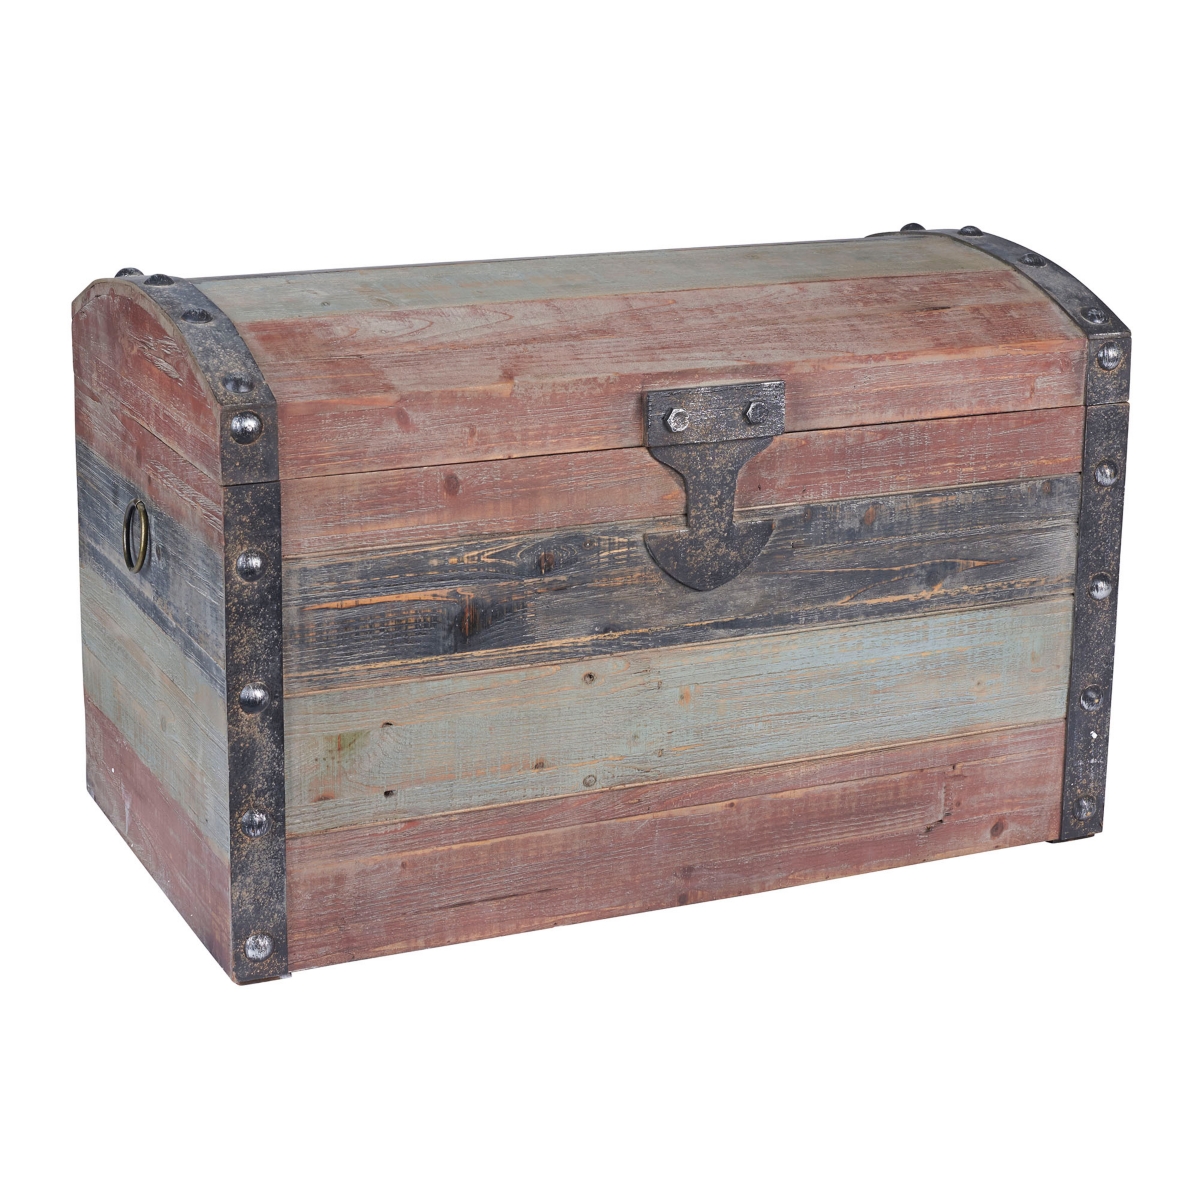 Household Essentials Large Weathered Wooden Storage Trunk In Weathered Red,black,blue